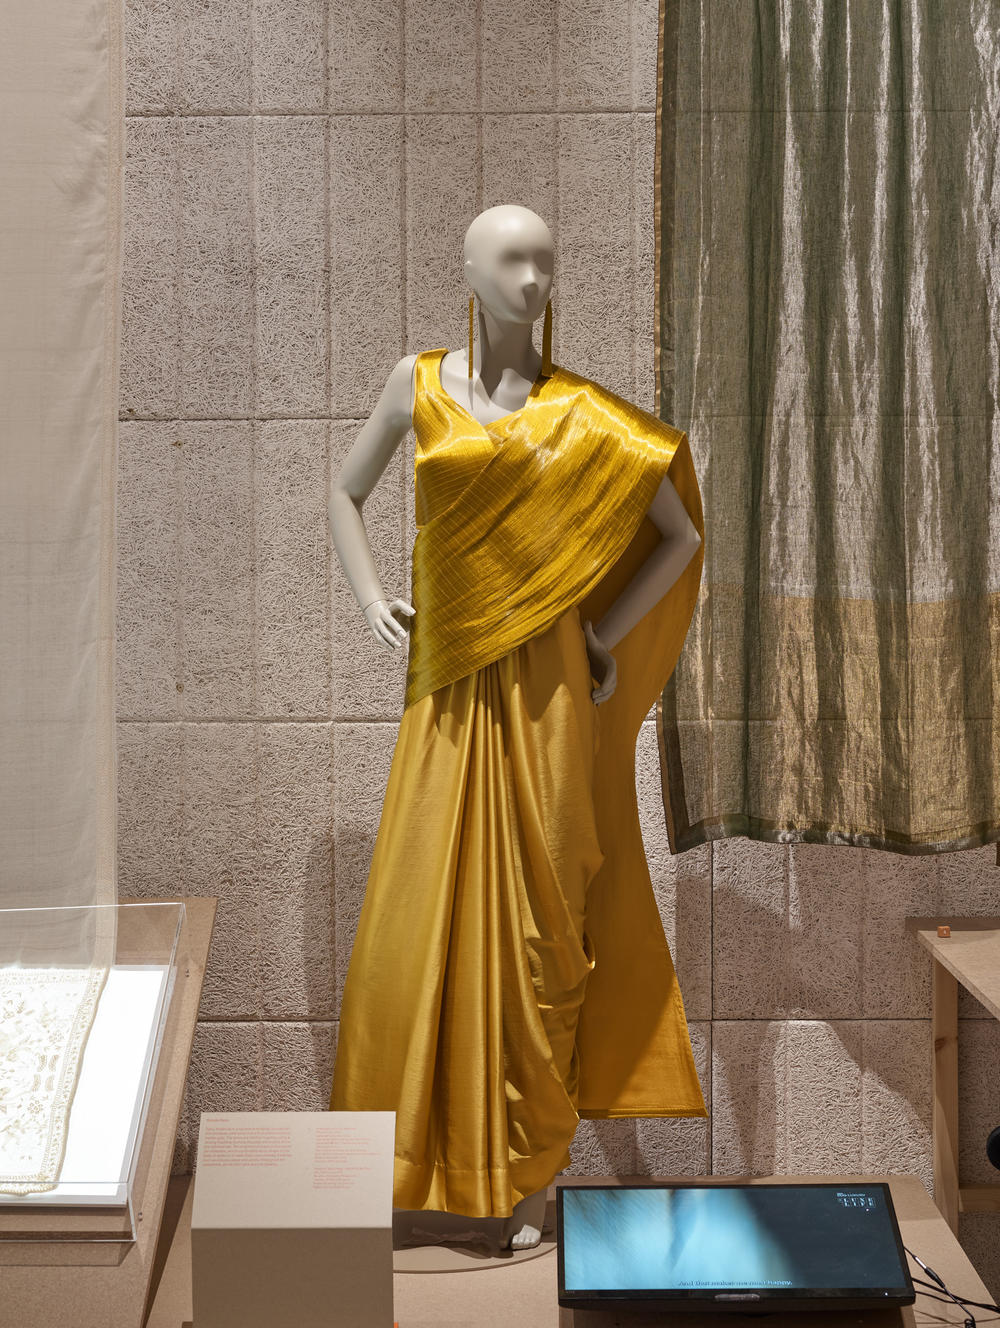 This sari is made of fine gold plated steel fibers. It's become popular among brides.